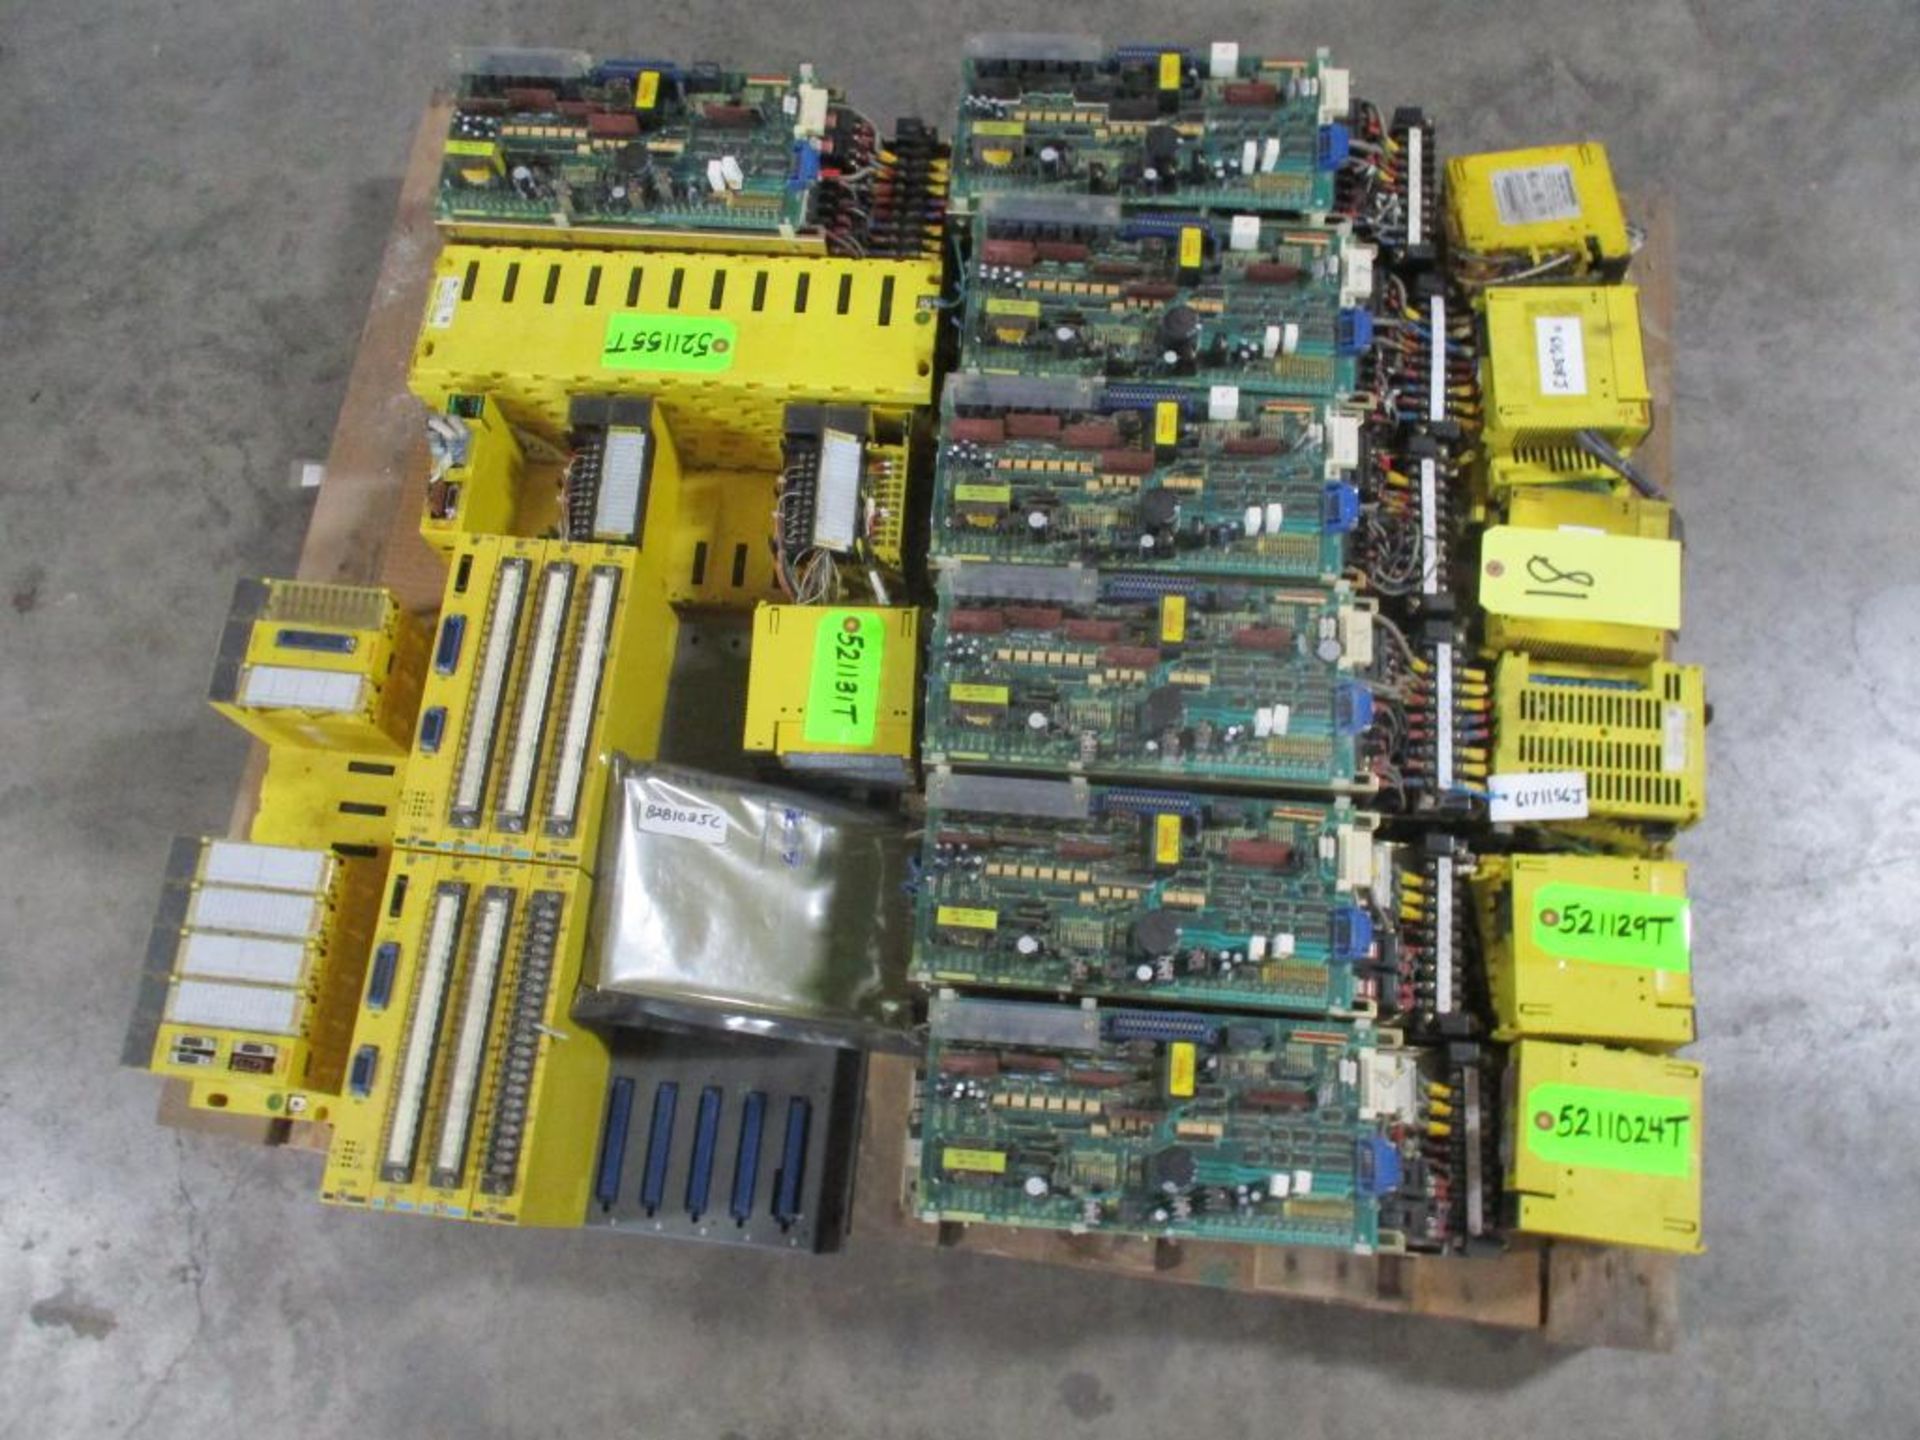 Misc. Fanuc Drives, Cards, & Parts, Slot Chassis - Image 2 of 2